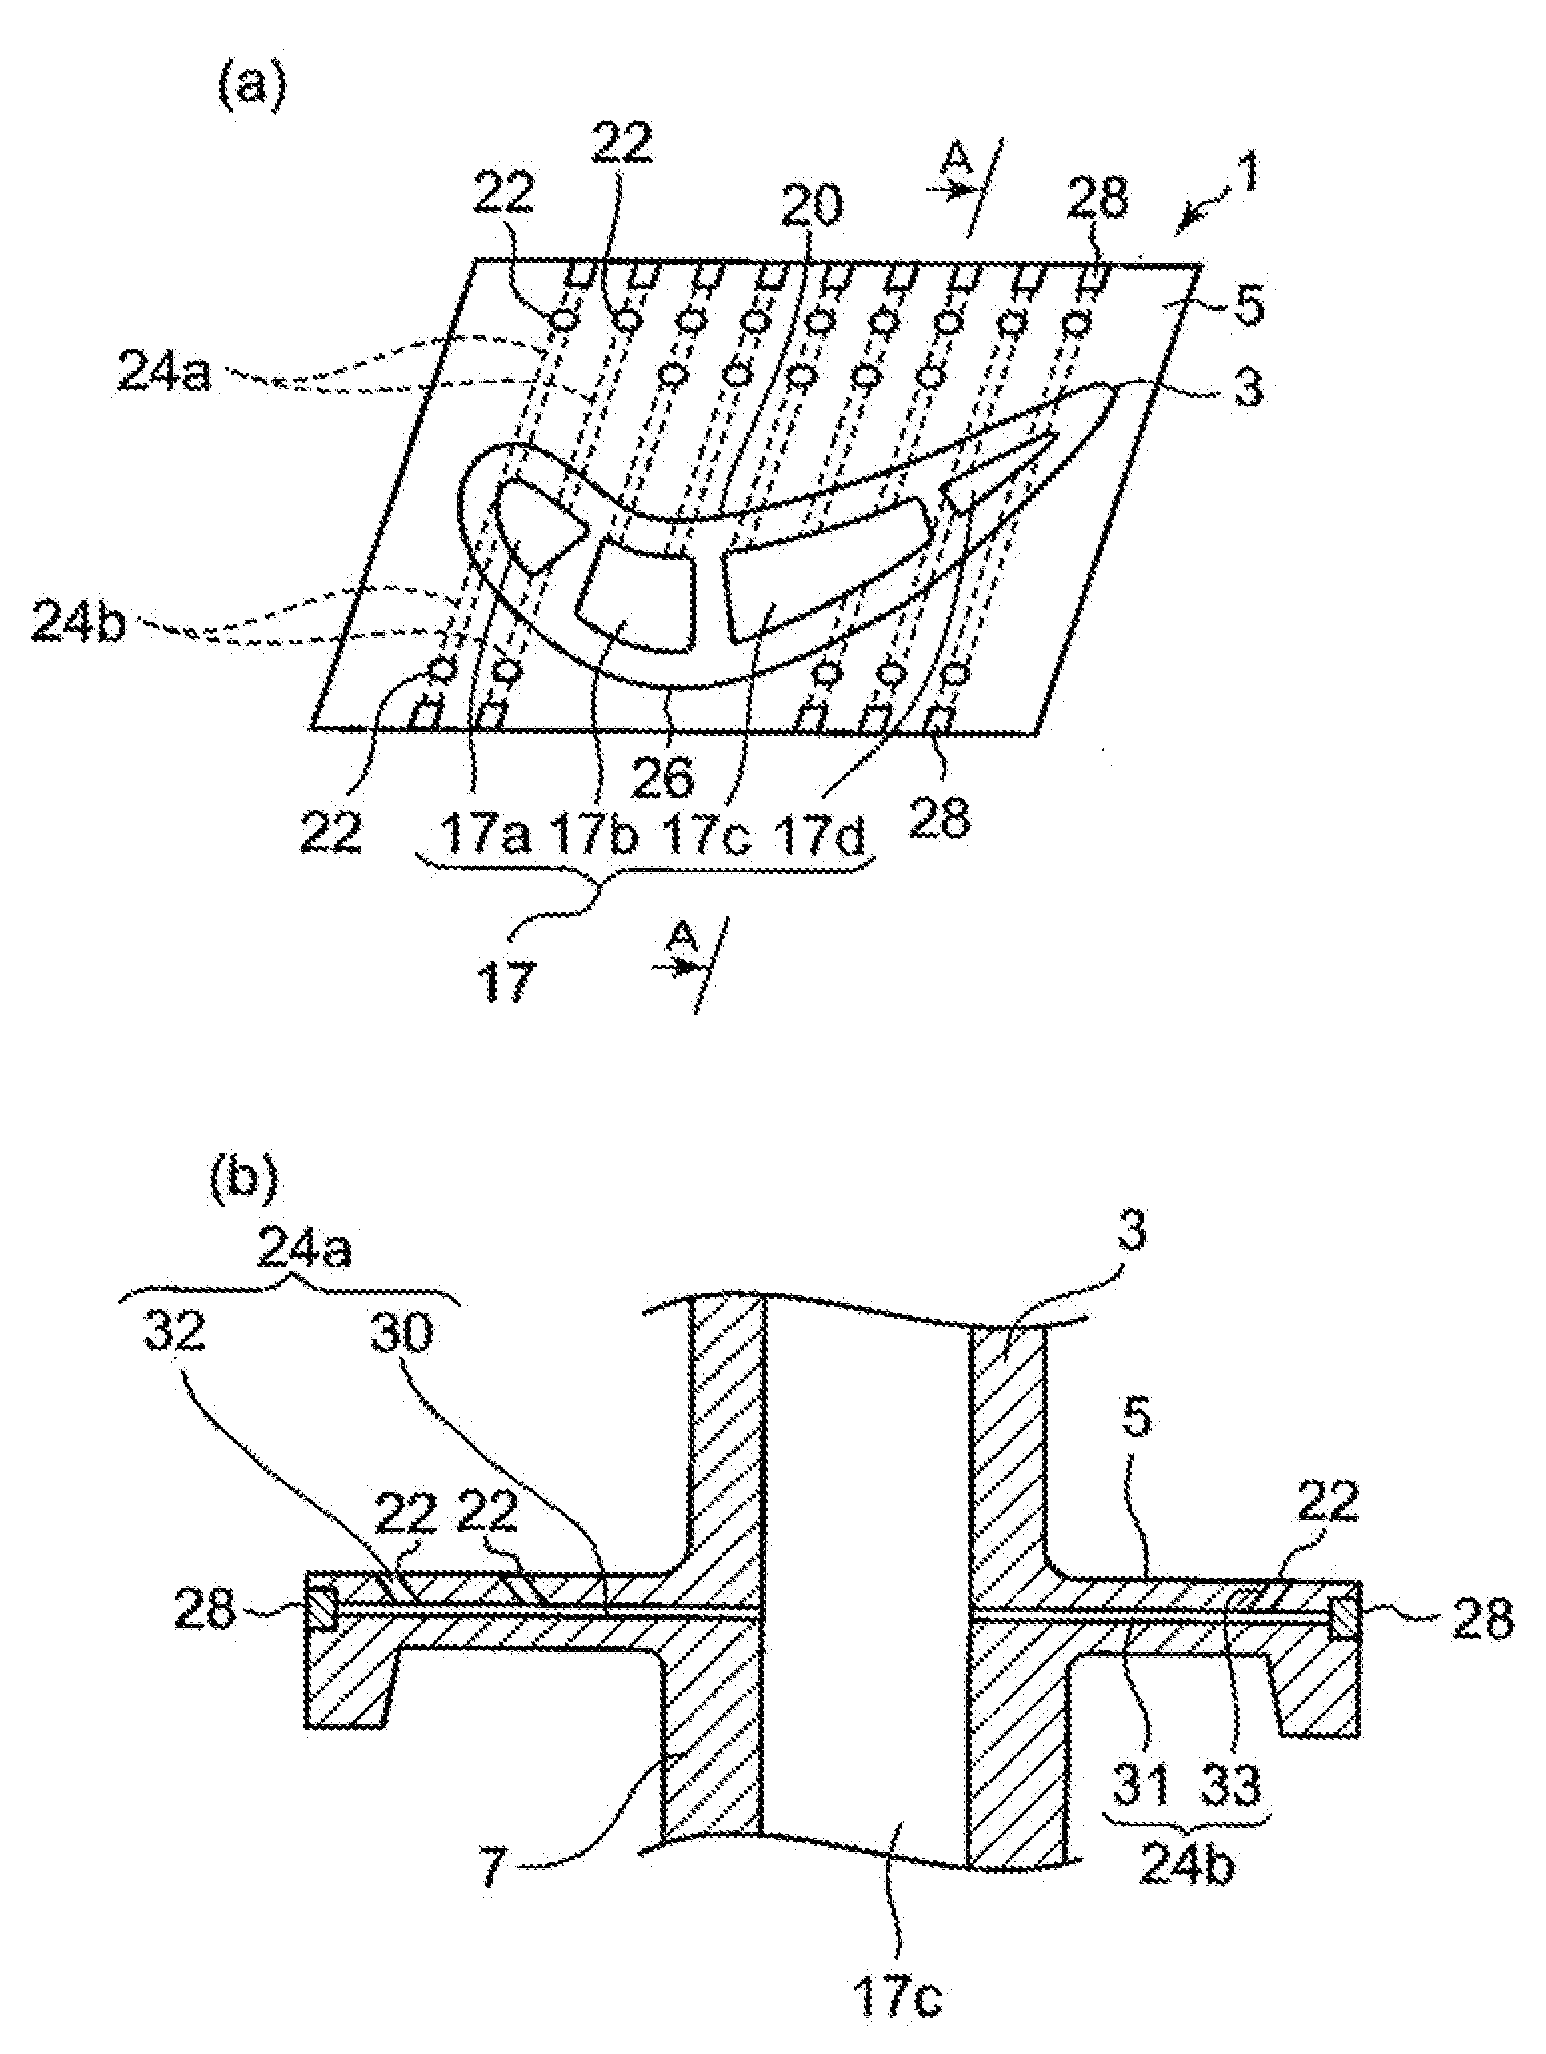 Platform cooling structure for gas turbine moving blade